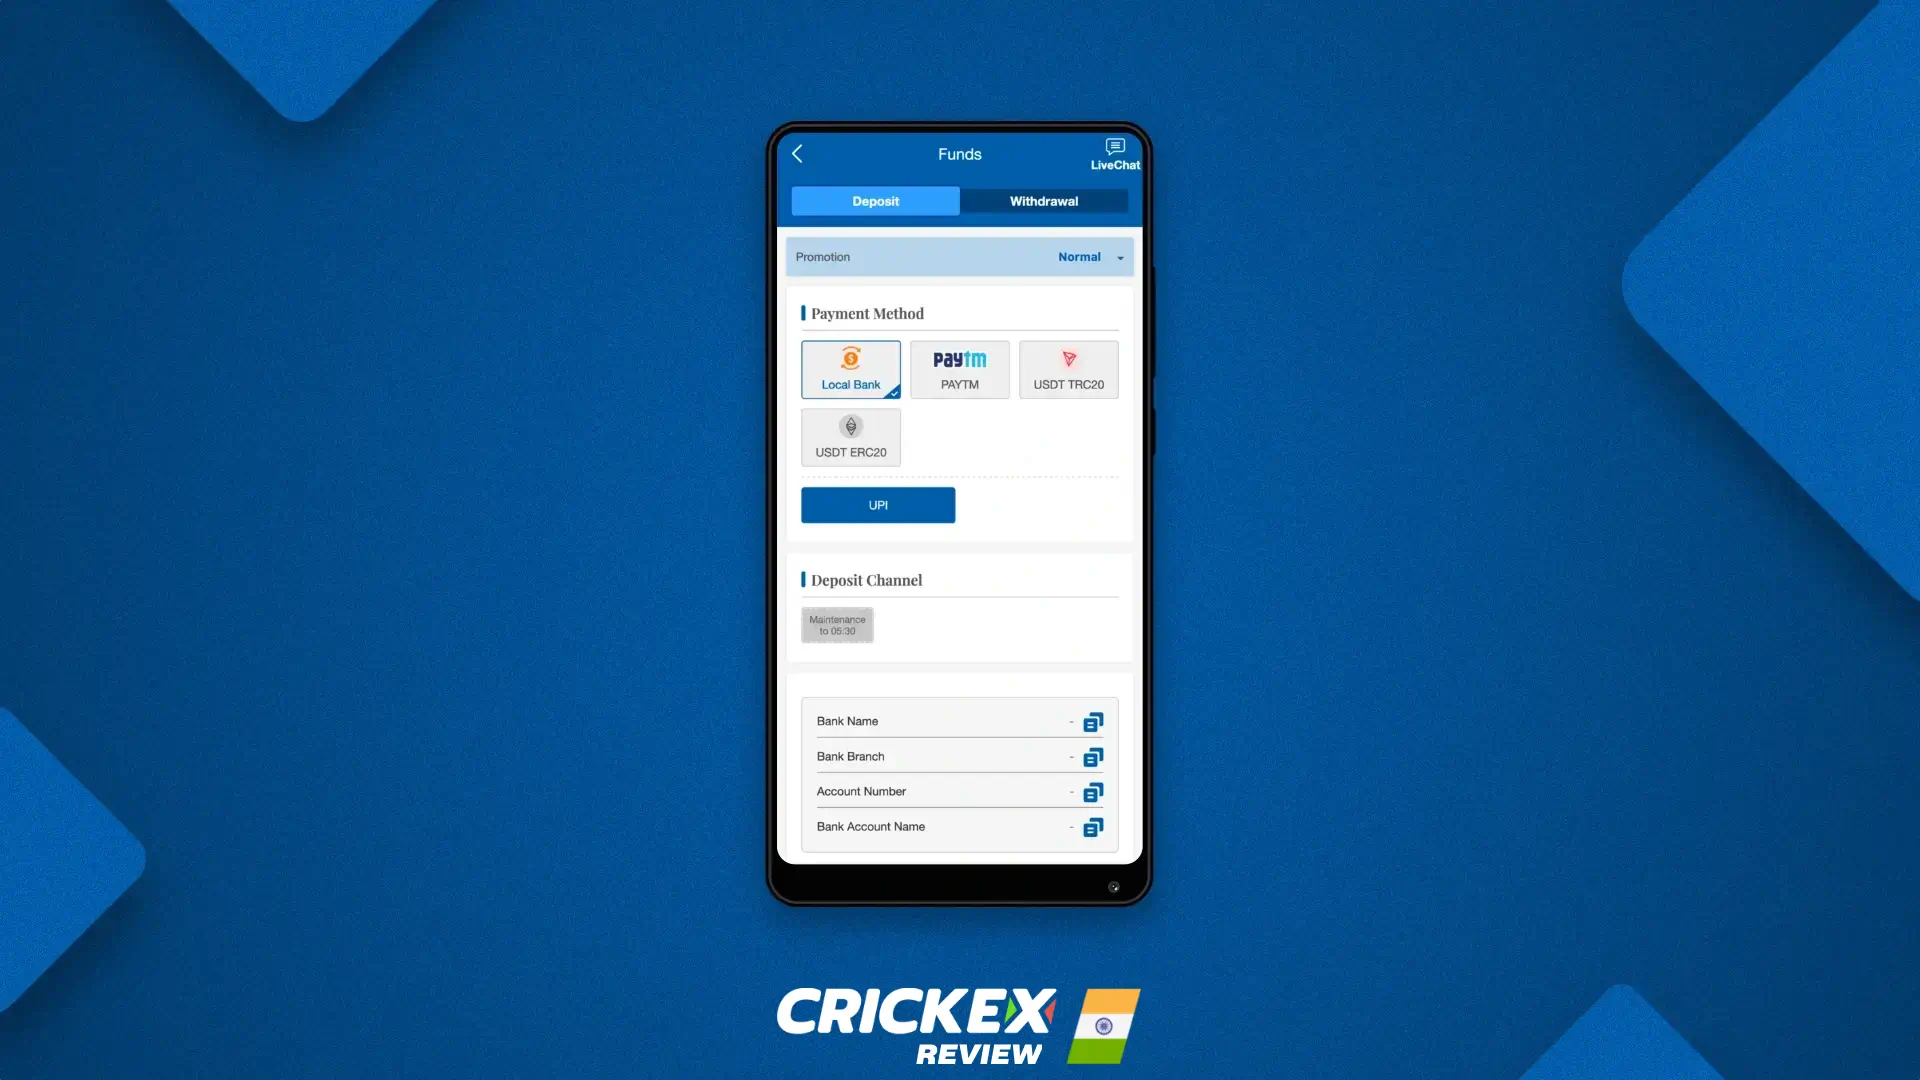 Available payment methods in the crickex mobile app for indian players